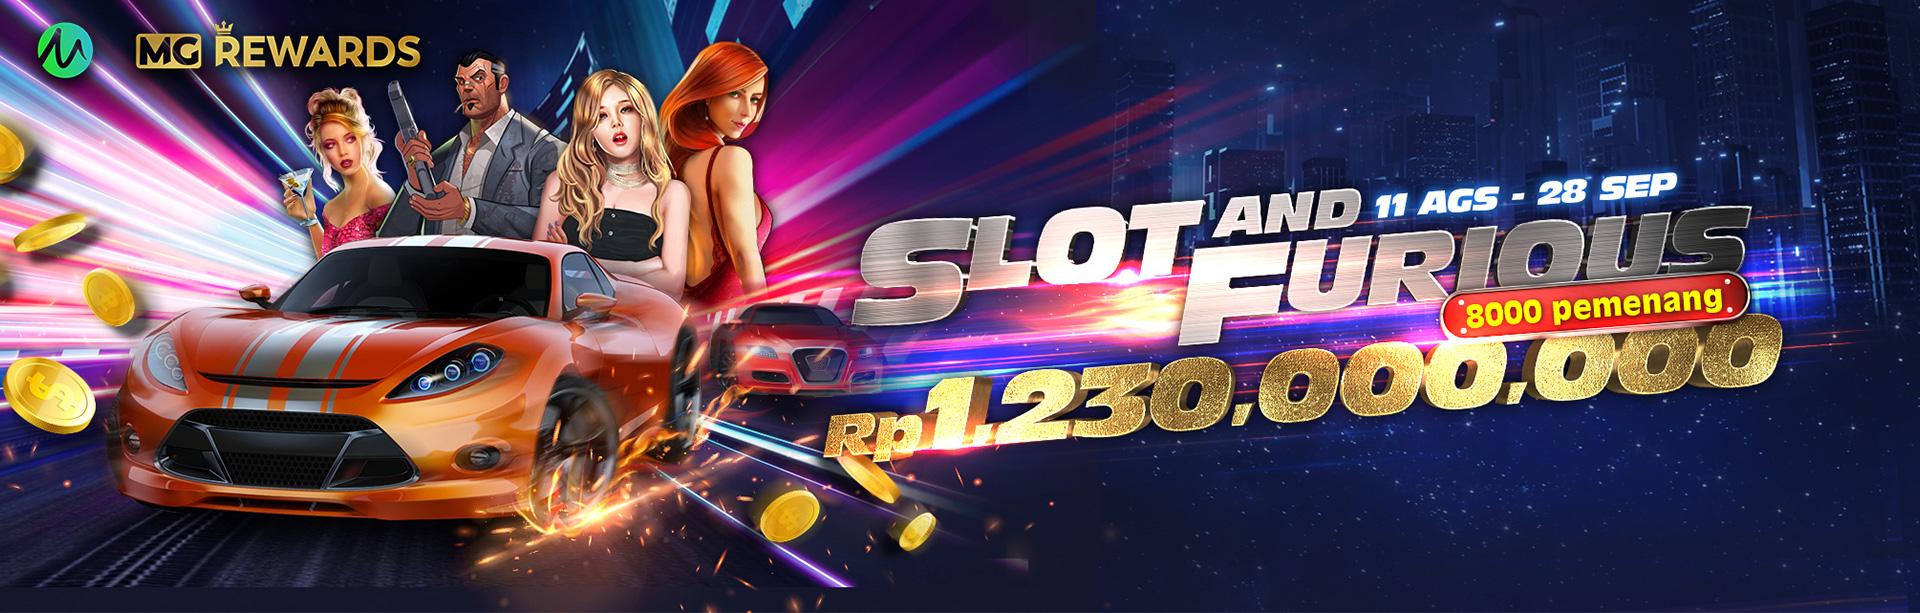 Microgaming Event Slot and Furious